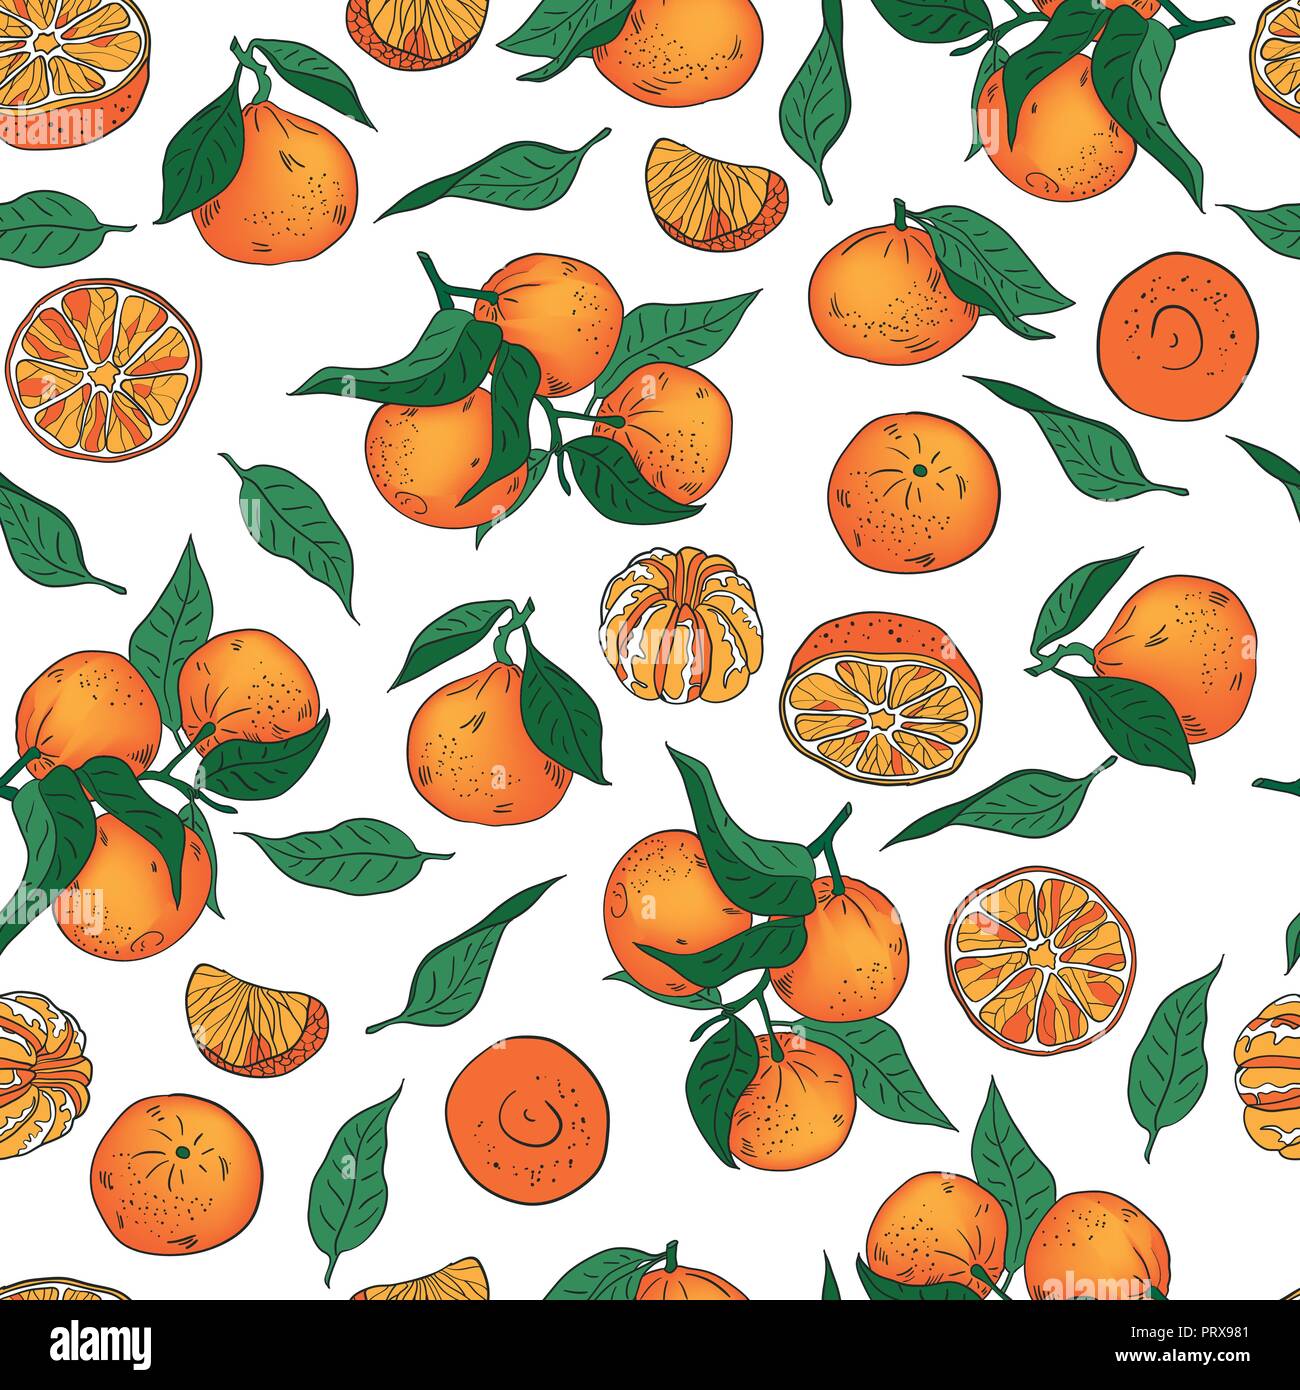 Seamless vector pattern of whole and peeled tangerines and leaves on a white background Stock Vector